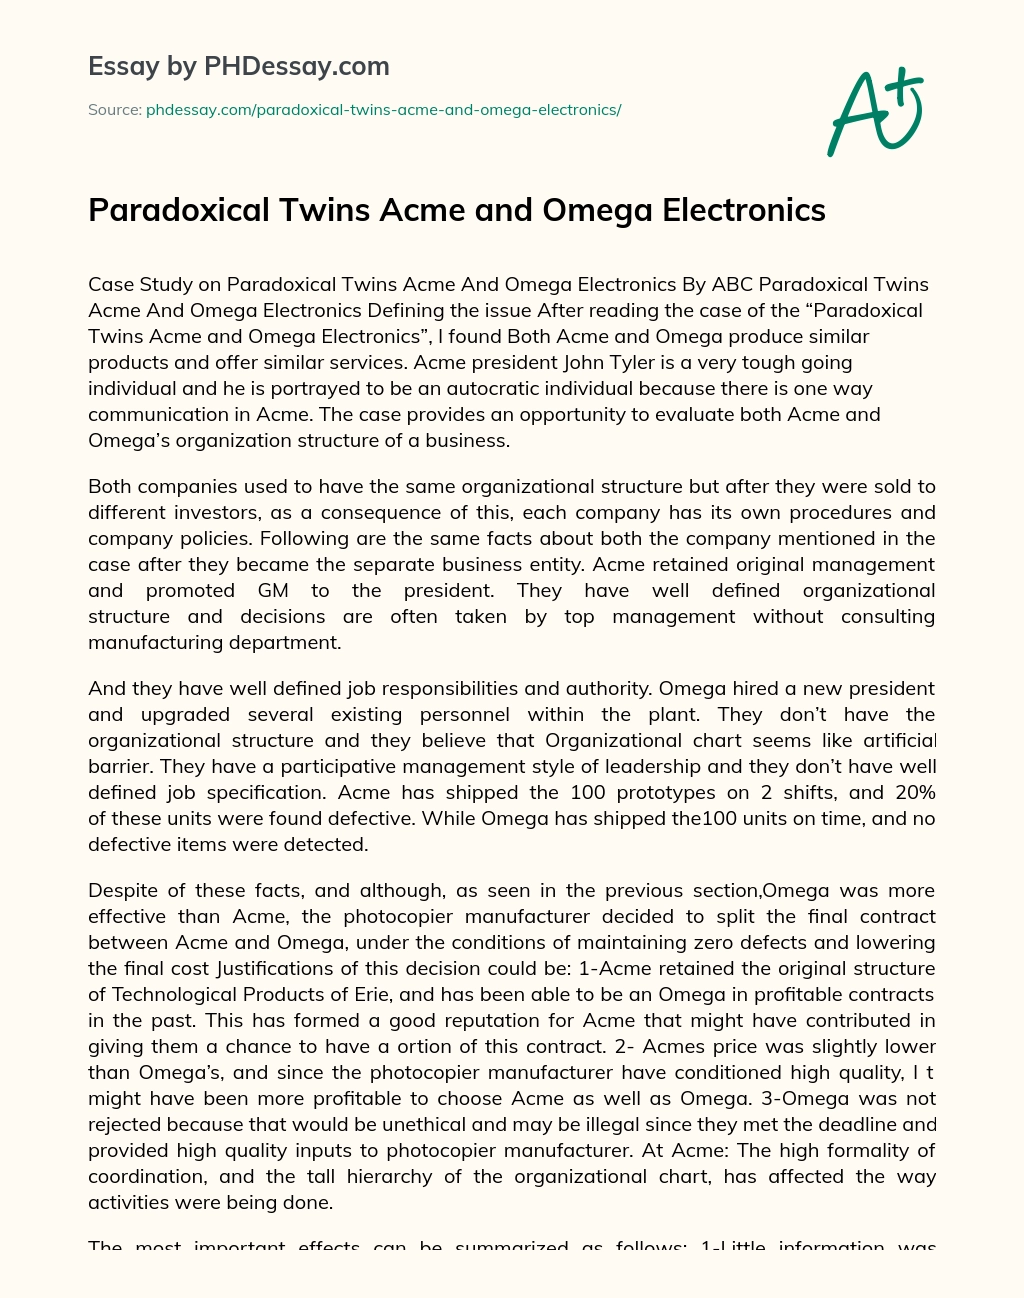 Paradoxical Twins Acme and Omega Electronics essay